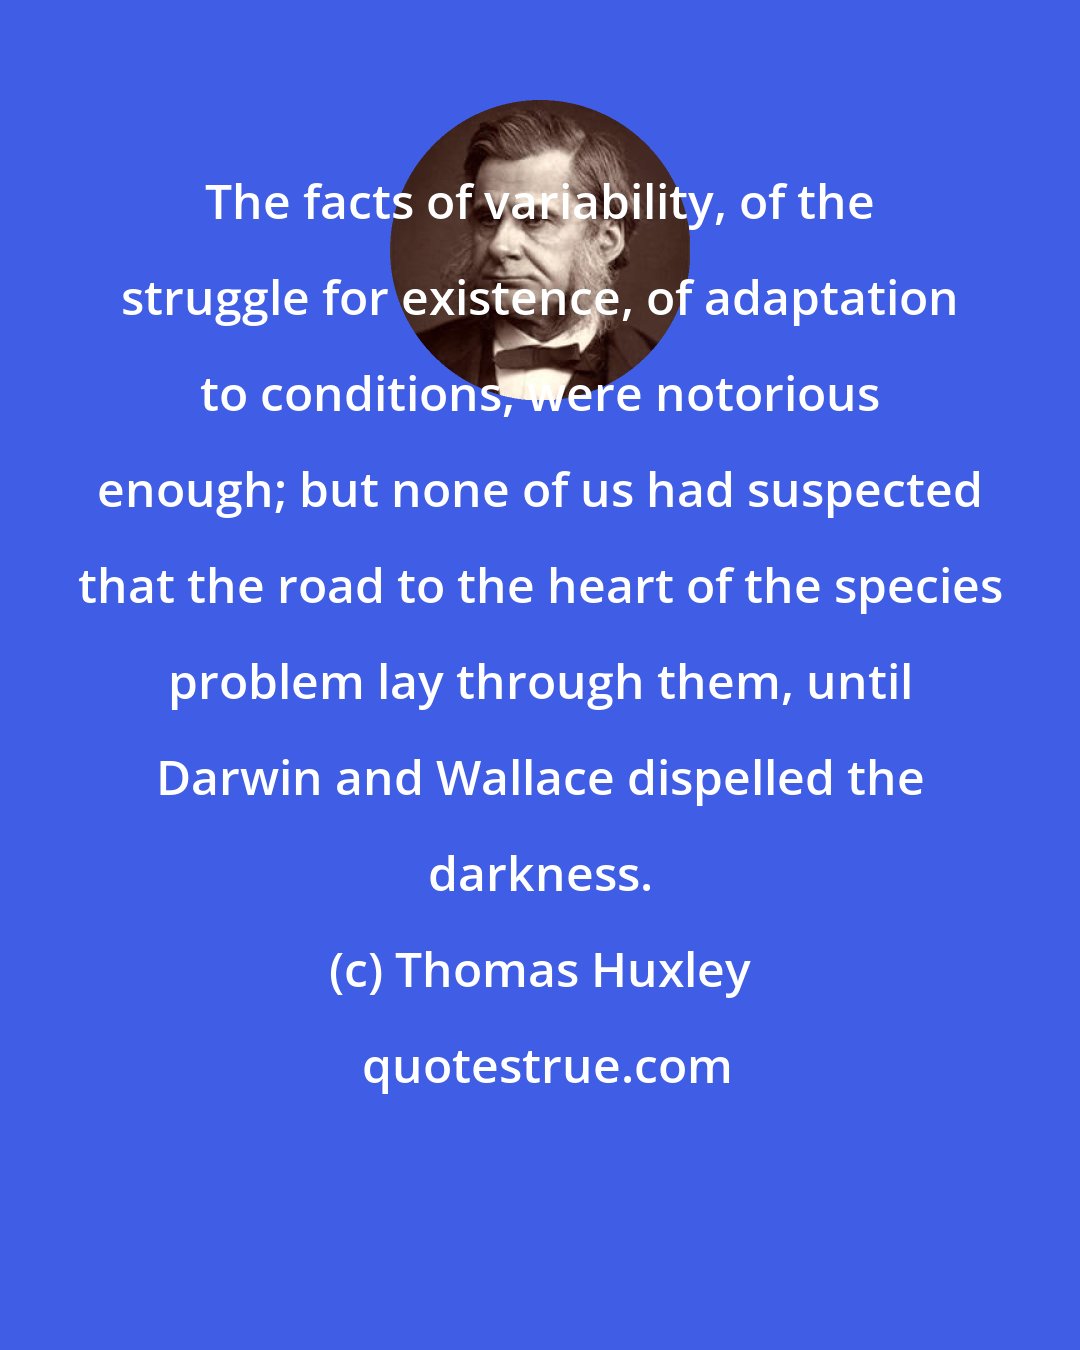 Thomas Huxley: The facts of variability, of the struggle for existence, of adaptation to conditions, were notorious enough; but none of us had suspected that the road to the heart of the species problem lay through them, until Darwin and Wallace dispelled the darkness.